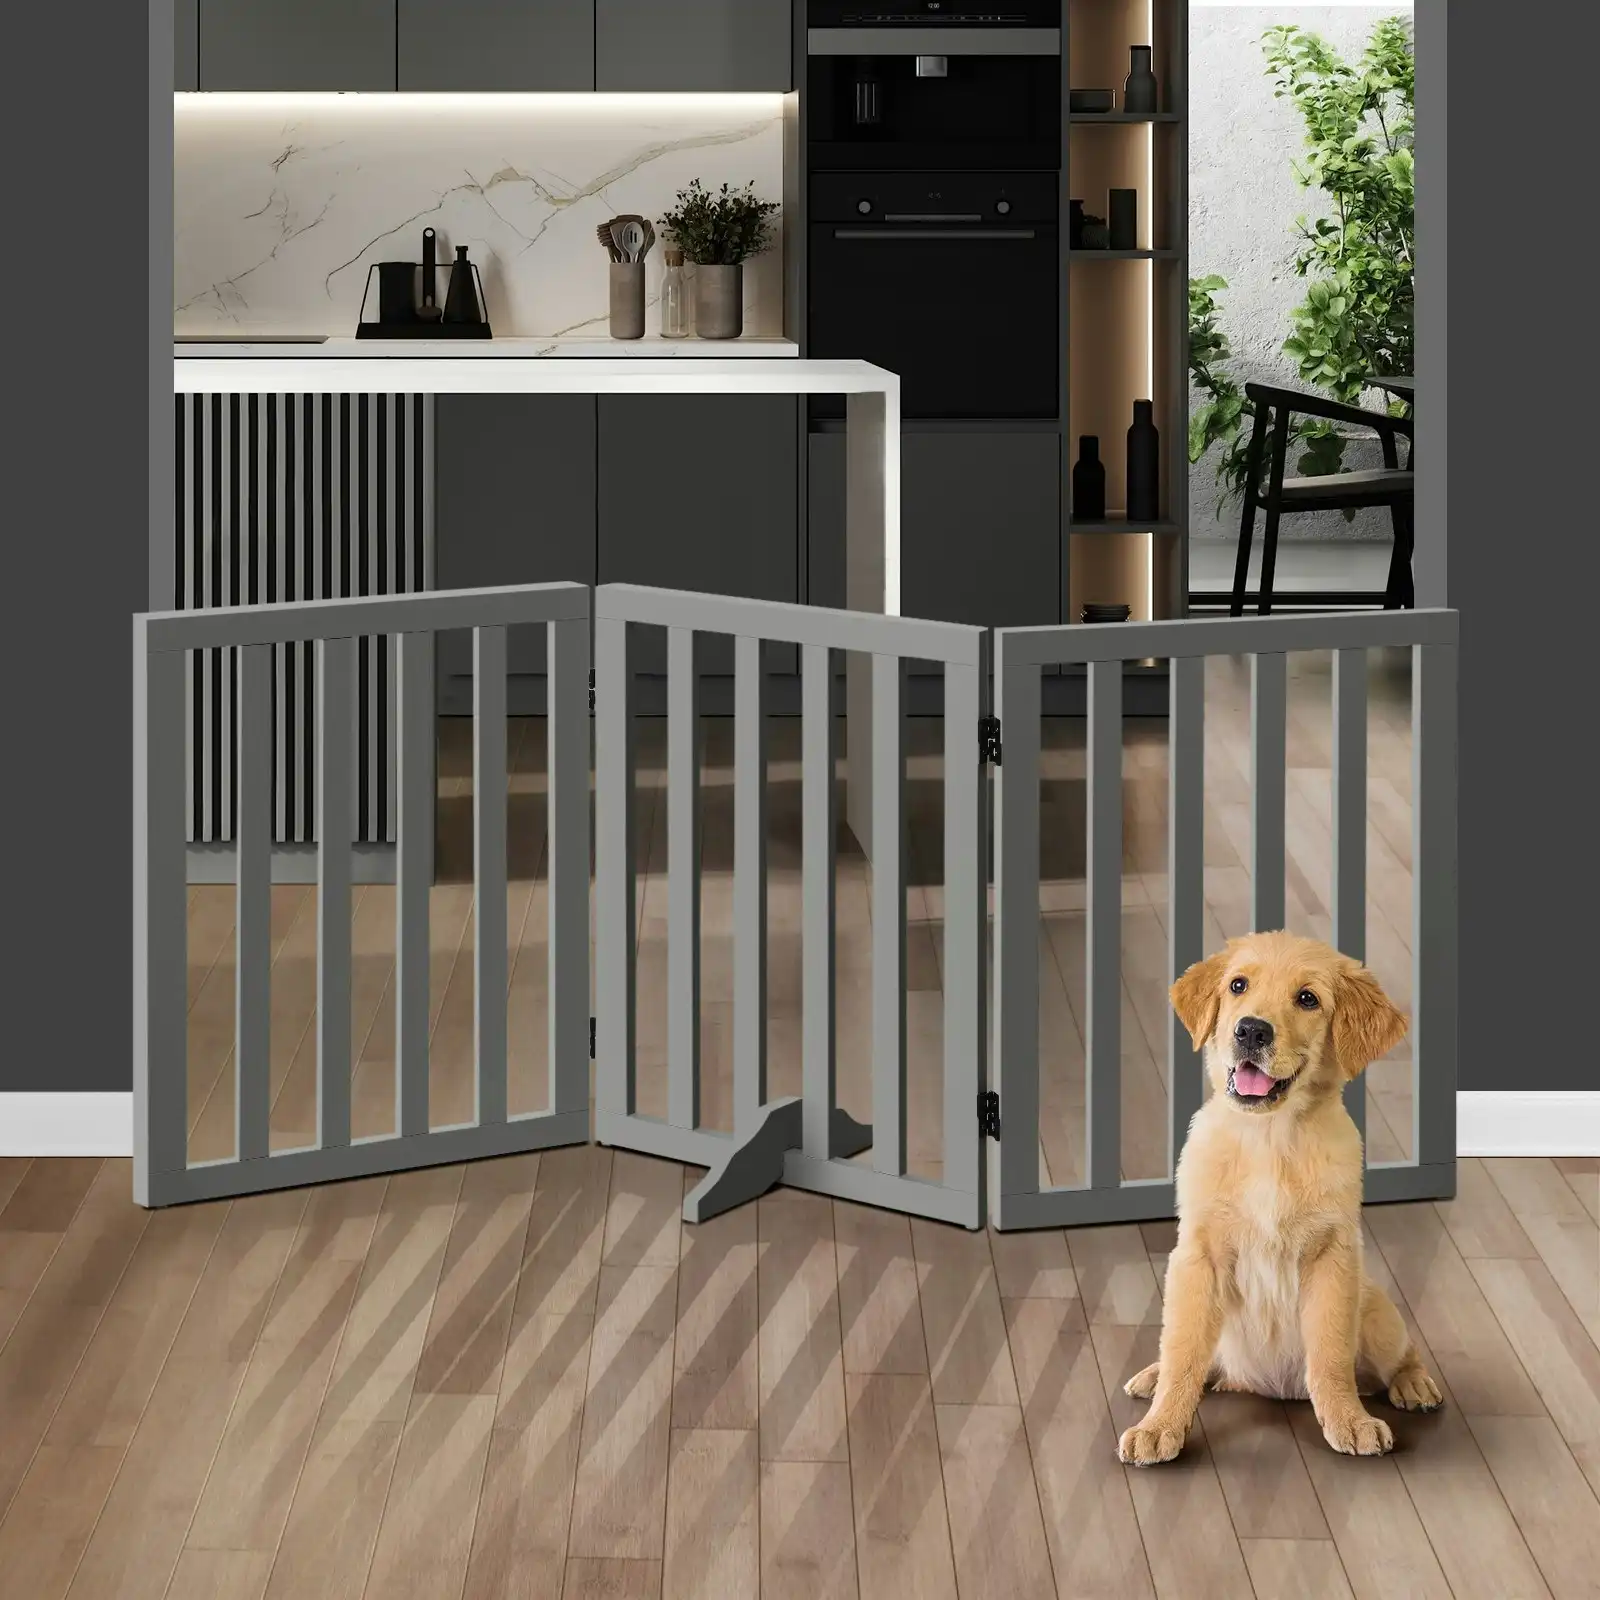 Alopet Wooden Pet Gate Dog Fence Safety Stair Barrier Security Door 3-Panel Grey